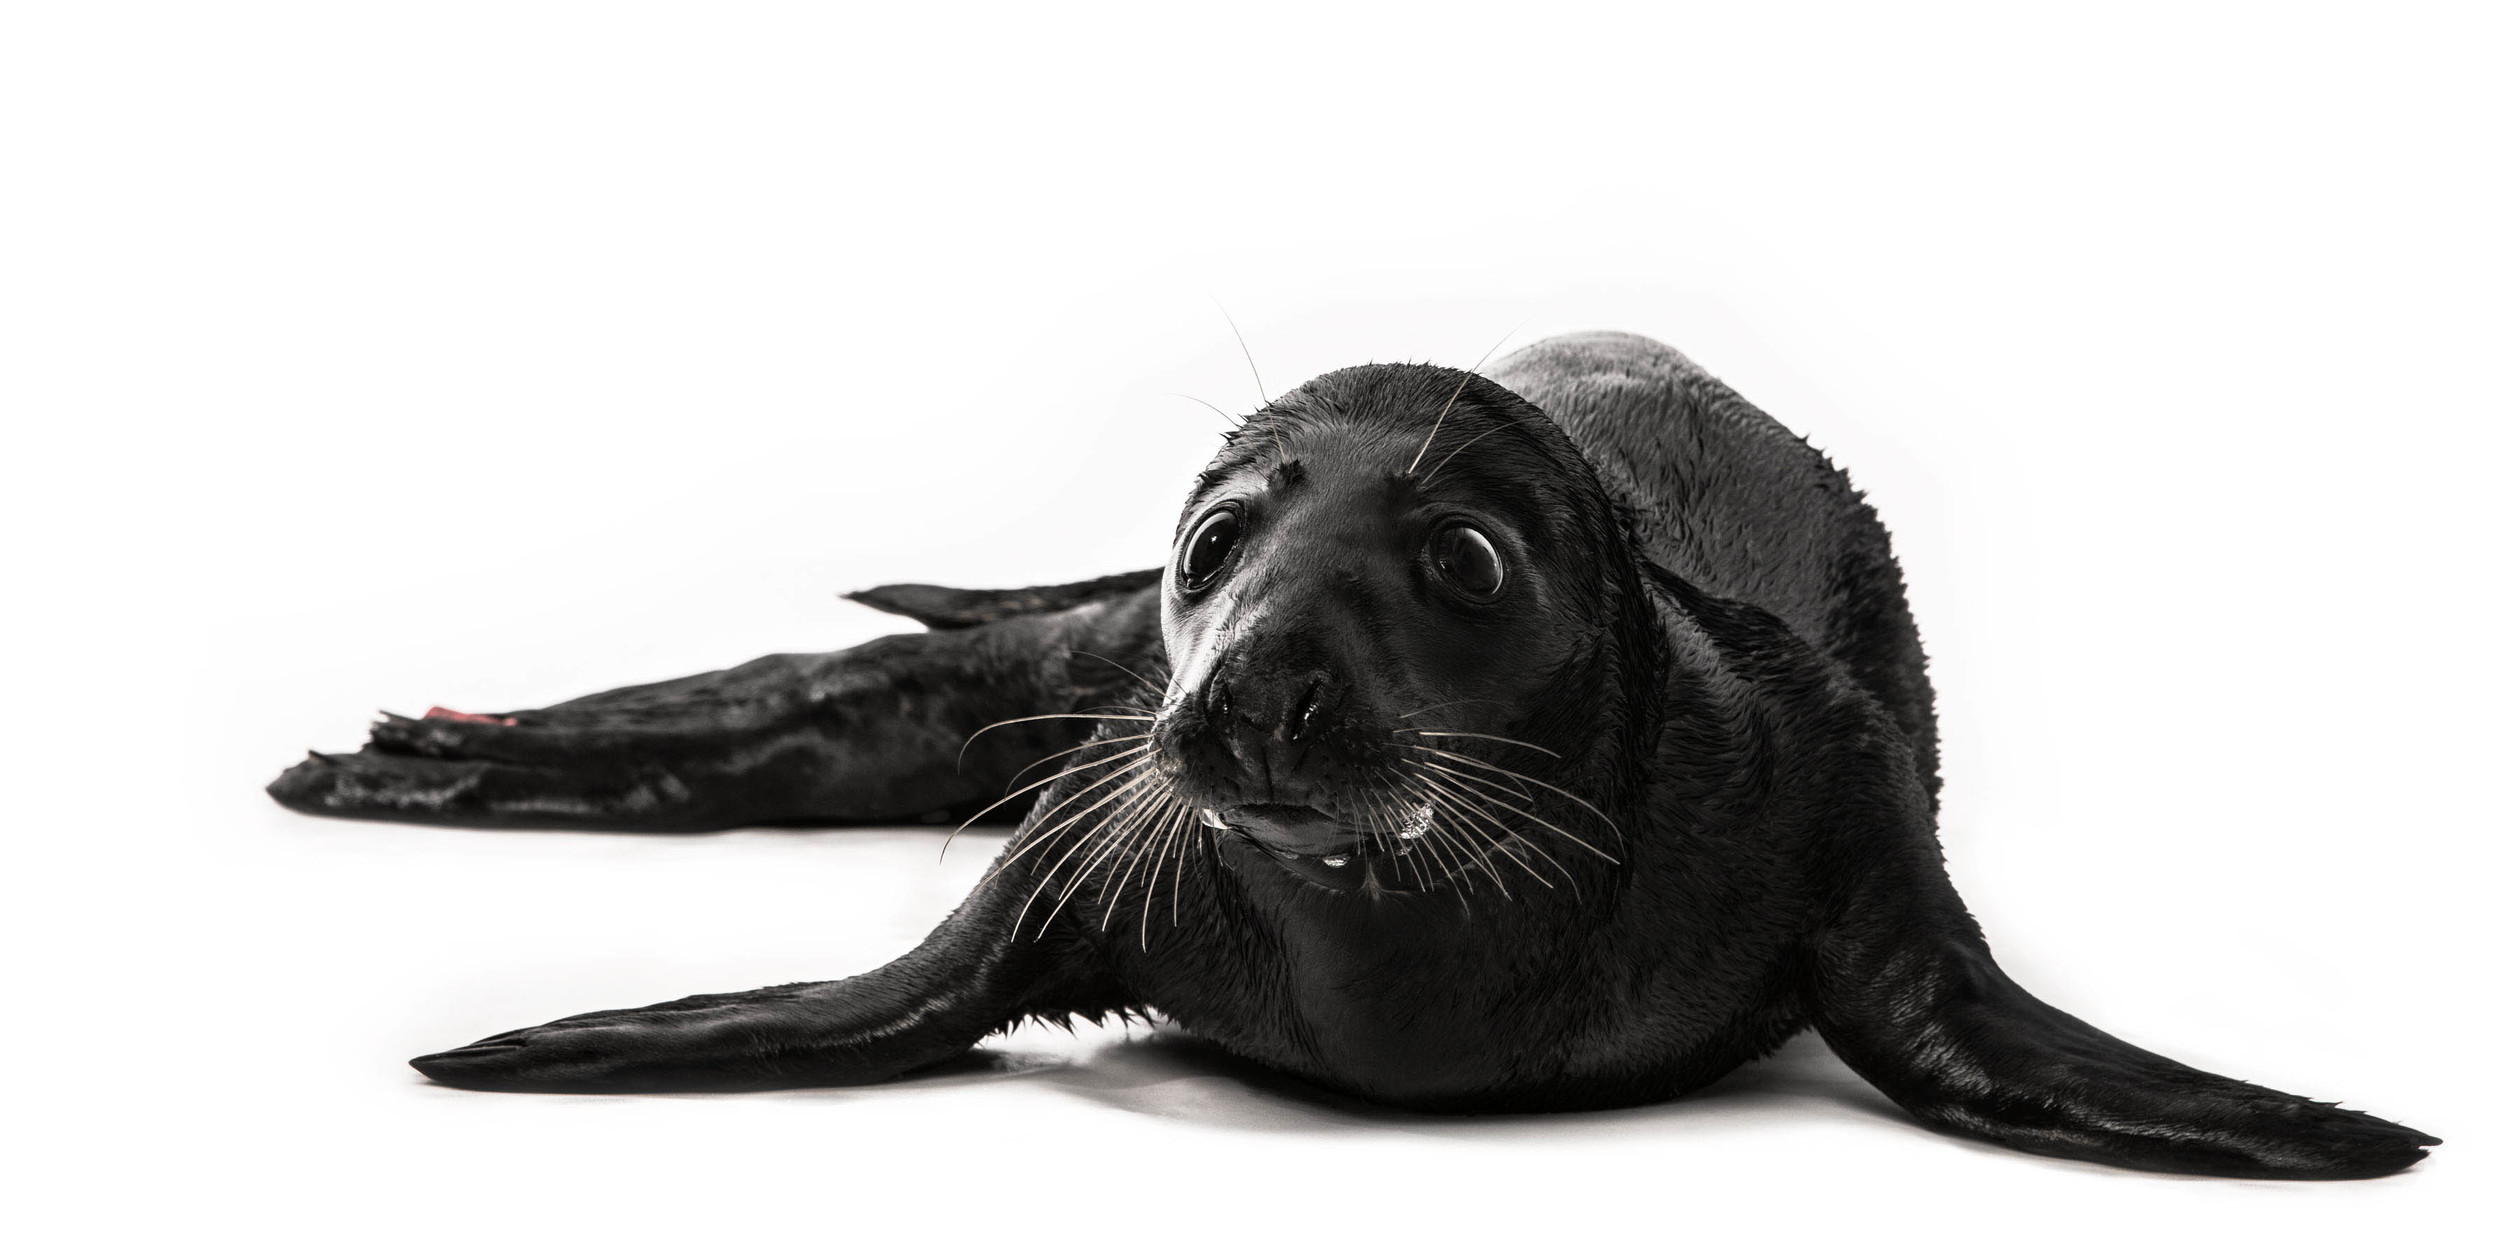  SEALS HOSPITAL Zeehonden Creche Pieterburen (NL), a hospital for seals. In the shelter stay only animals that therefore sick, injured or in trouble have fallen for any reason. There goal is to bring the animals back to health and convalesced back to